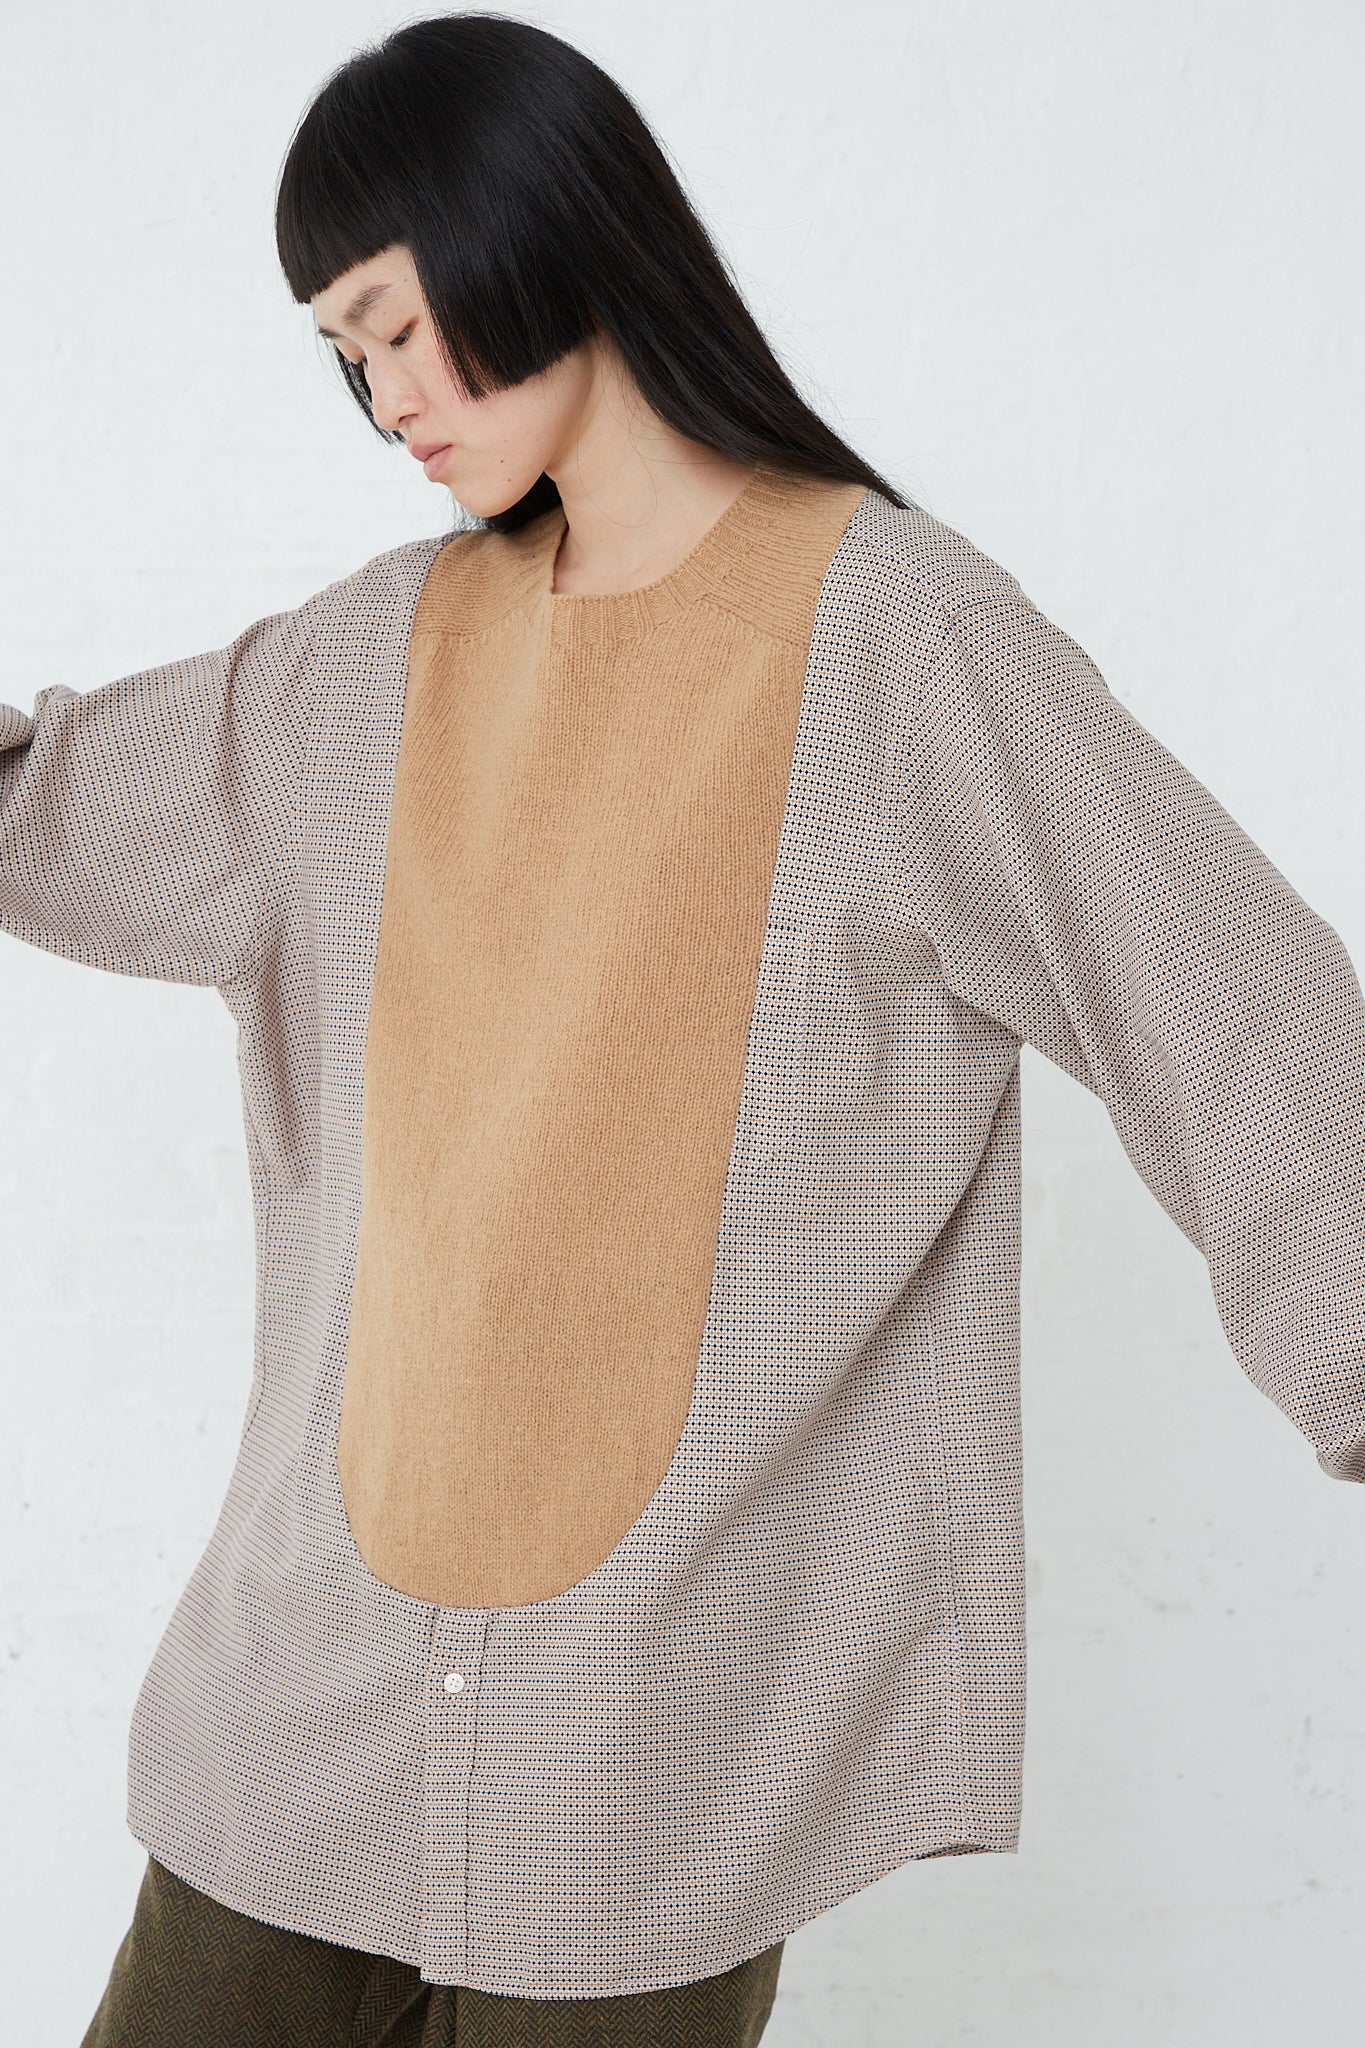 A woman wearing a Bless No. 68 Front Insert Pullover in Beige Pattern with a tan front.